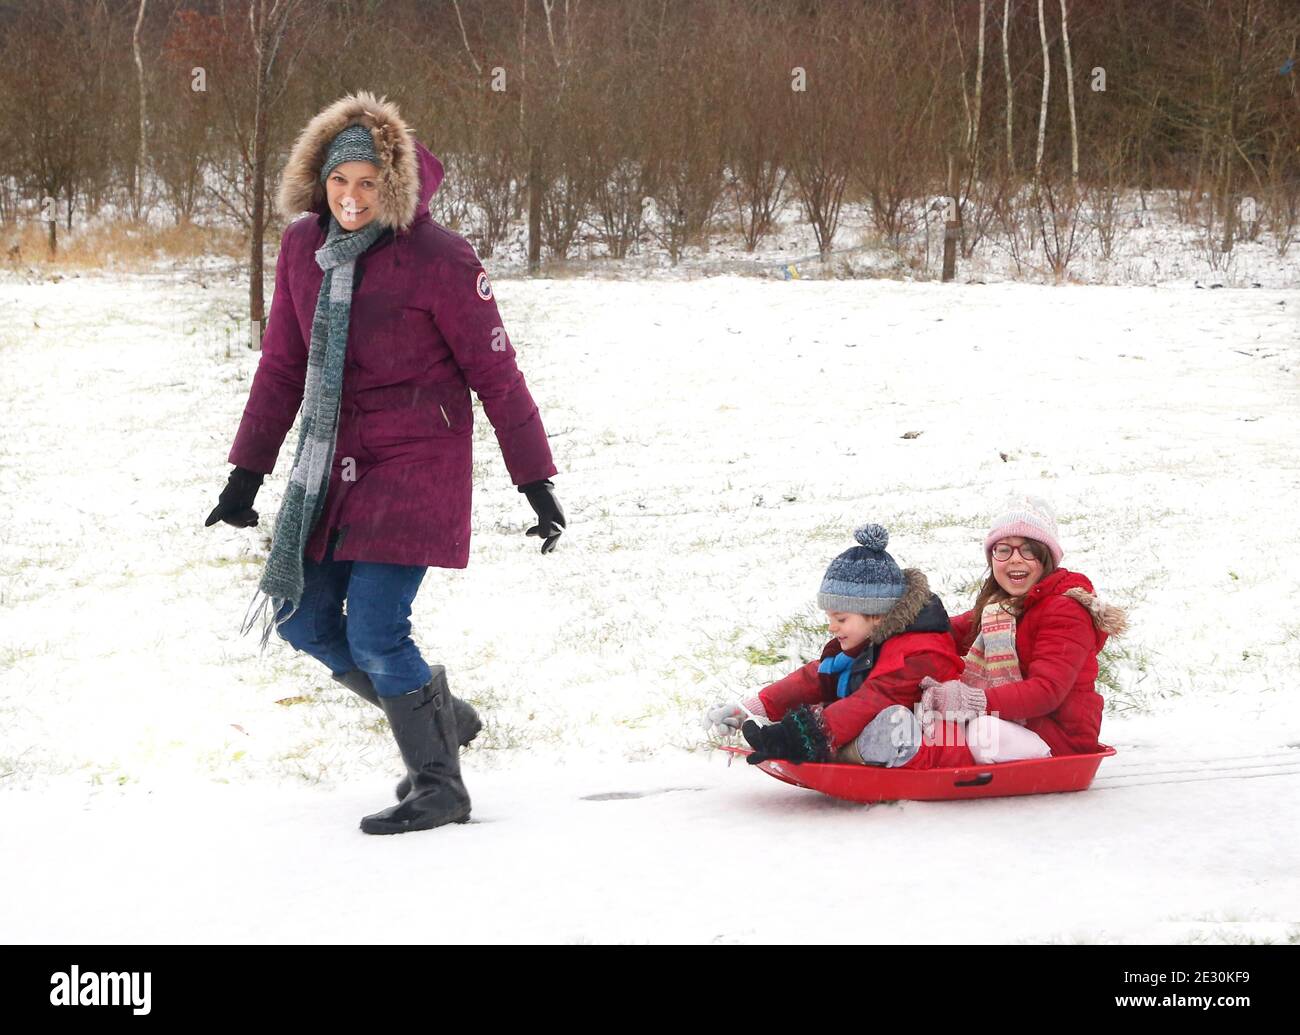 Haverhill, Suffolk UK. 16th January 2021. Elizabeth Mitchell with her children Ivy 5 and Albert 3 have fun in the snow. Credit: Headlinephoto/Alamy Live News. Stock Photo